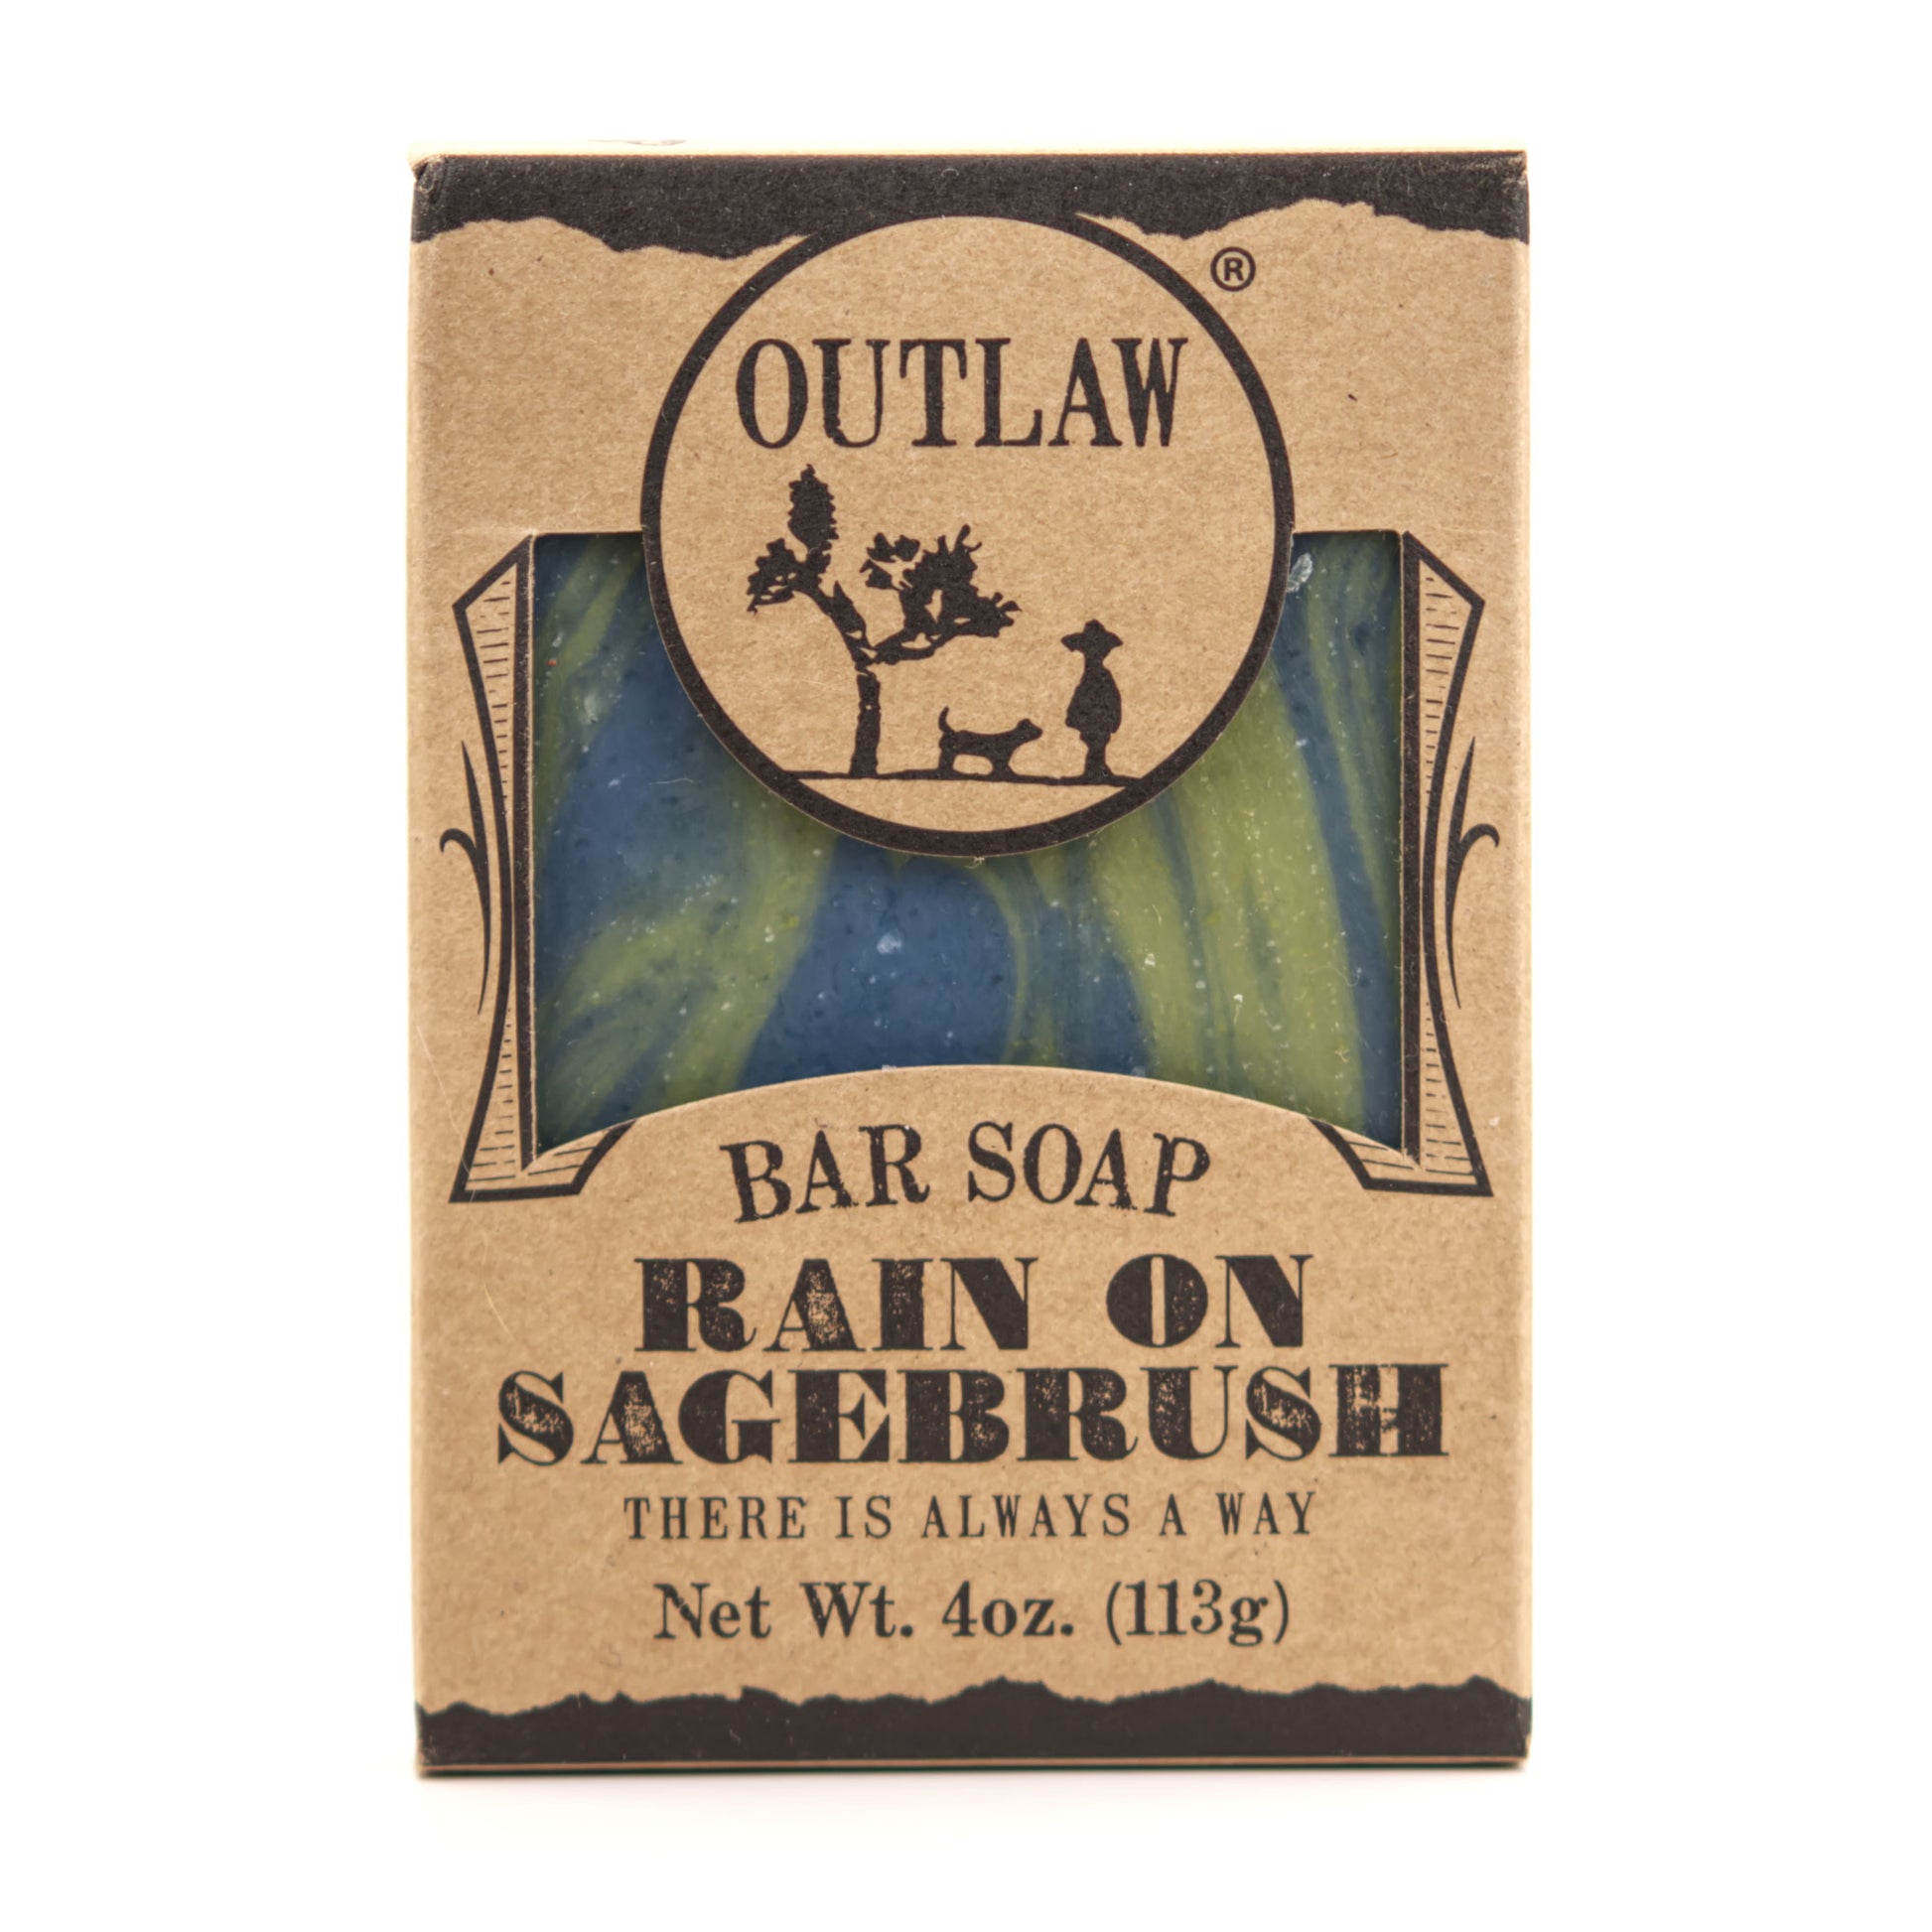 The 15 Best Dr. Squatch Soap Scents (2024 Update)